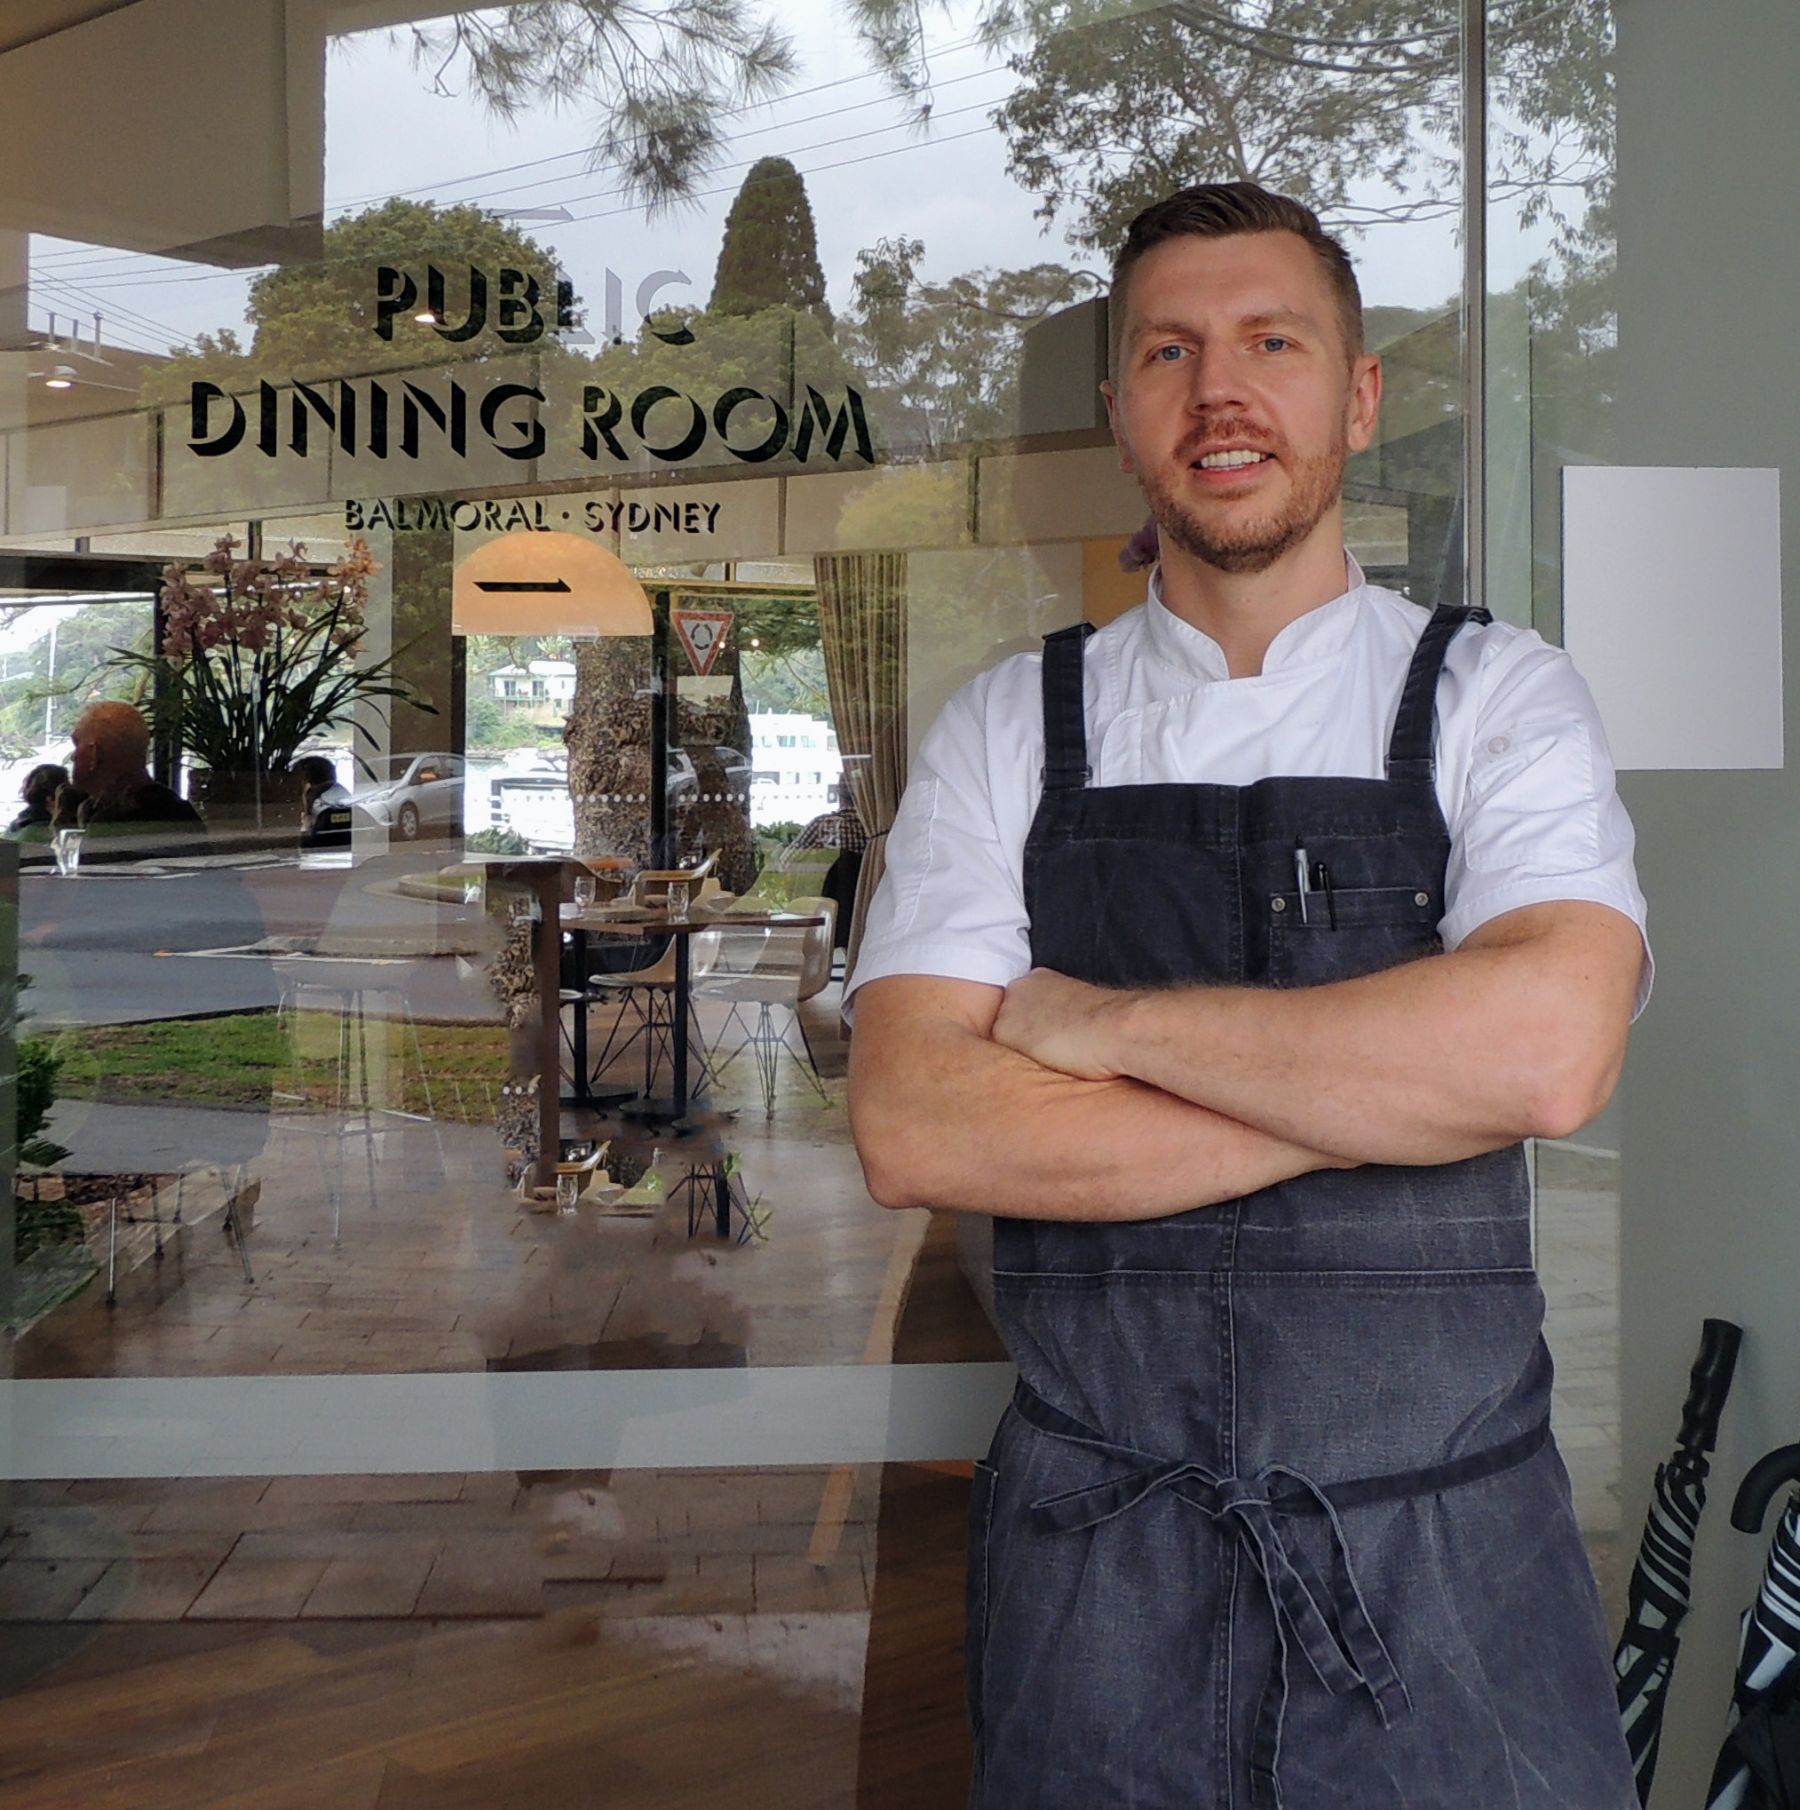 Support Your Local - Adam Tyl Public Dining Room NSW